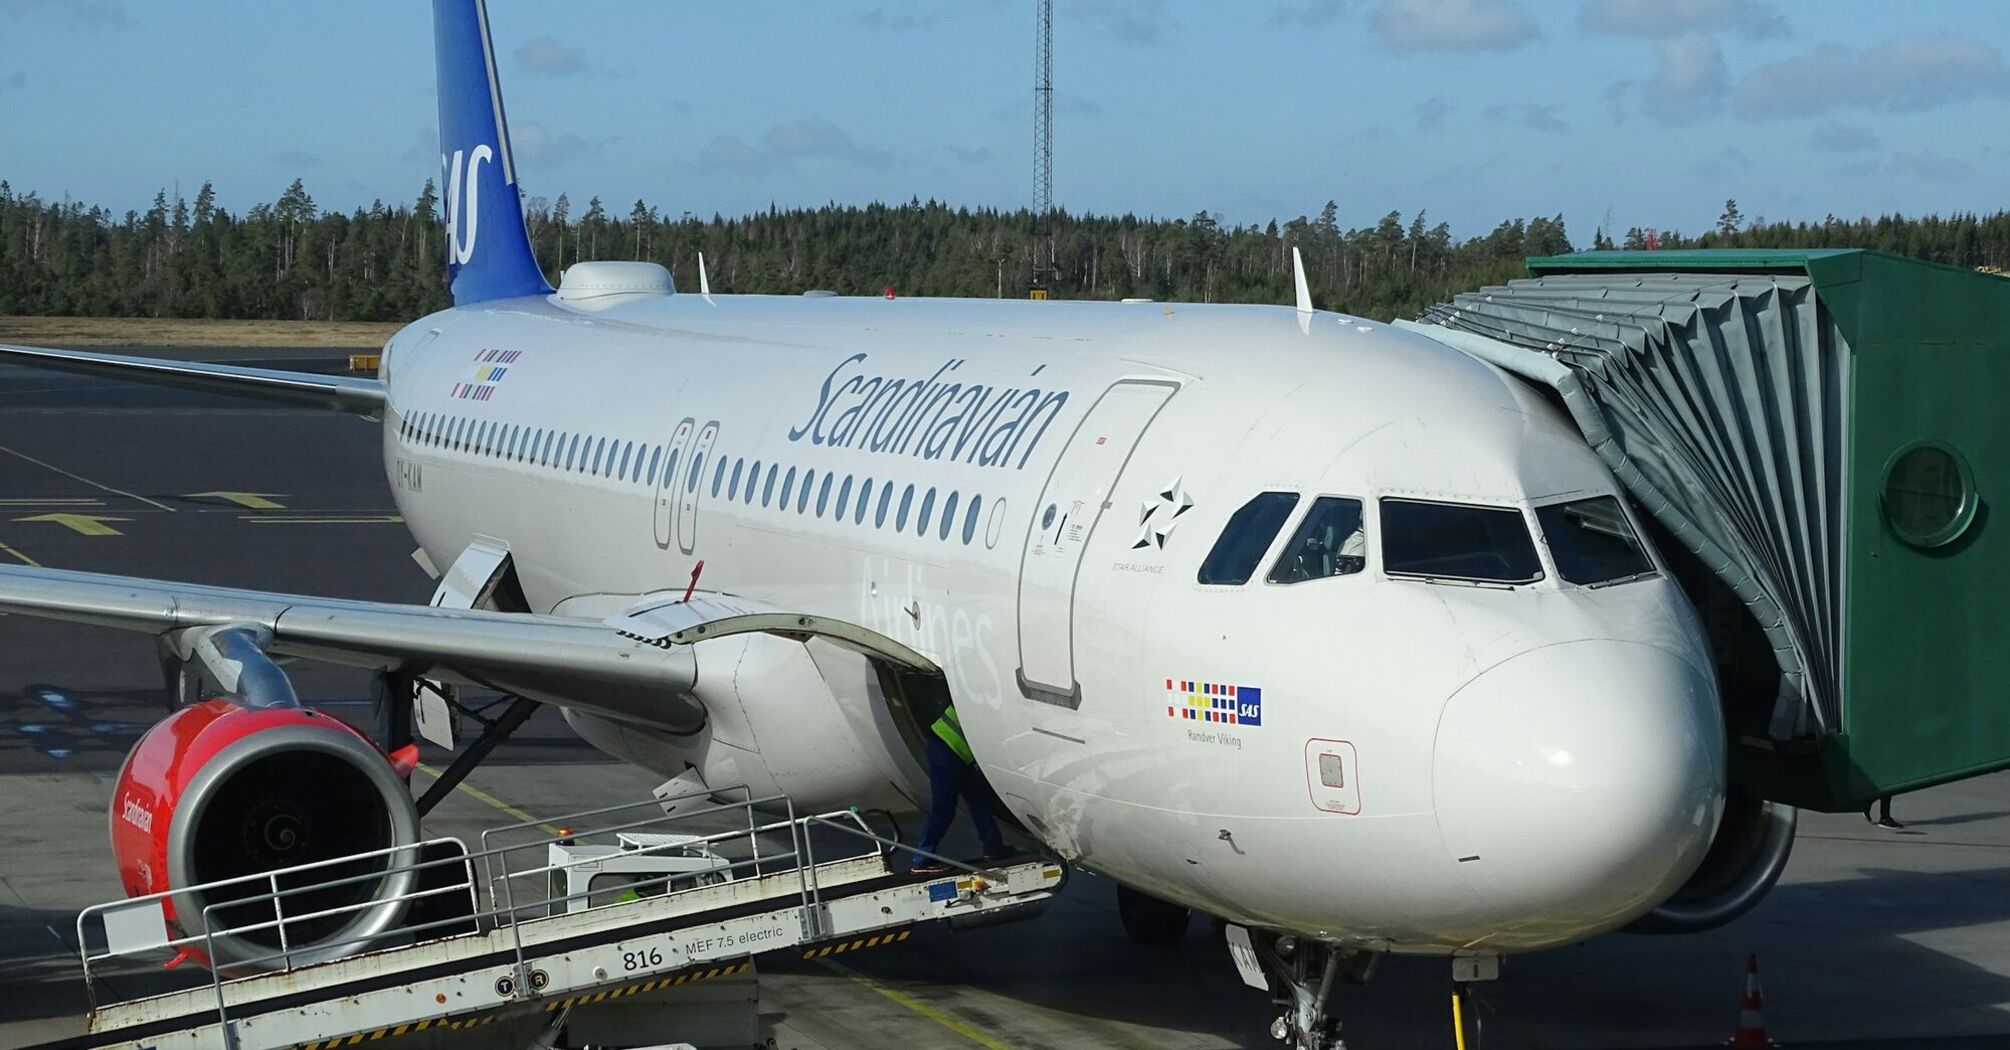 Scandinavian Airlines plane at the gate